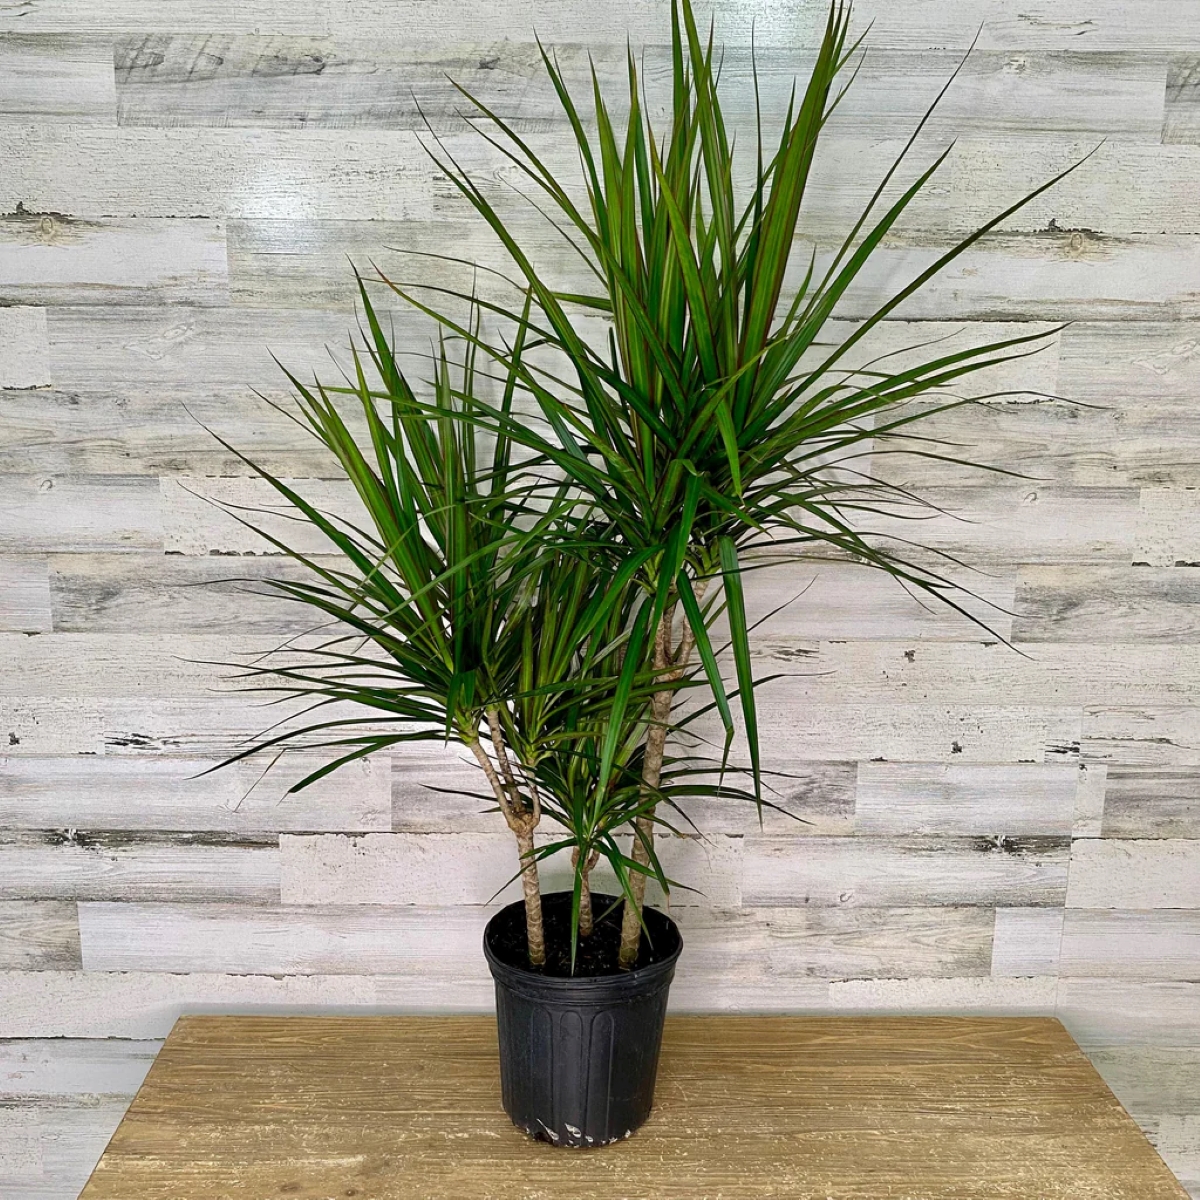 Dracaena plant with thin leaves